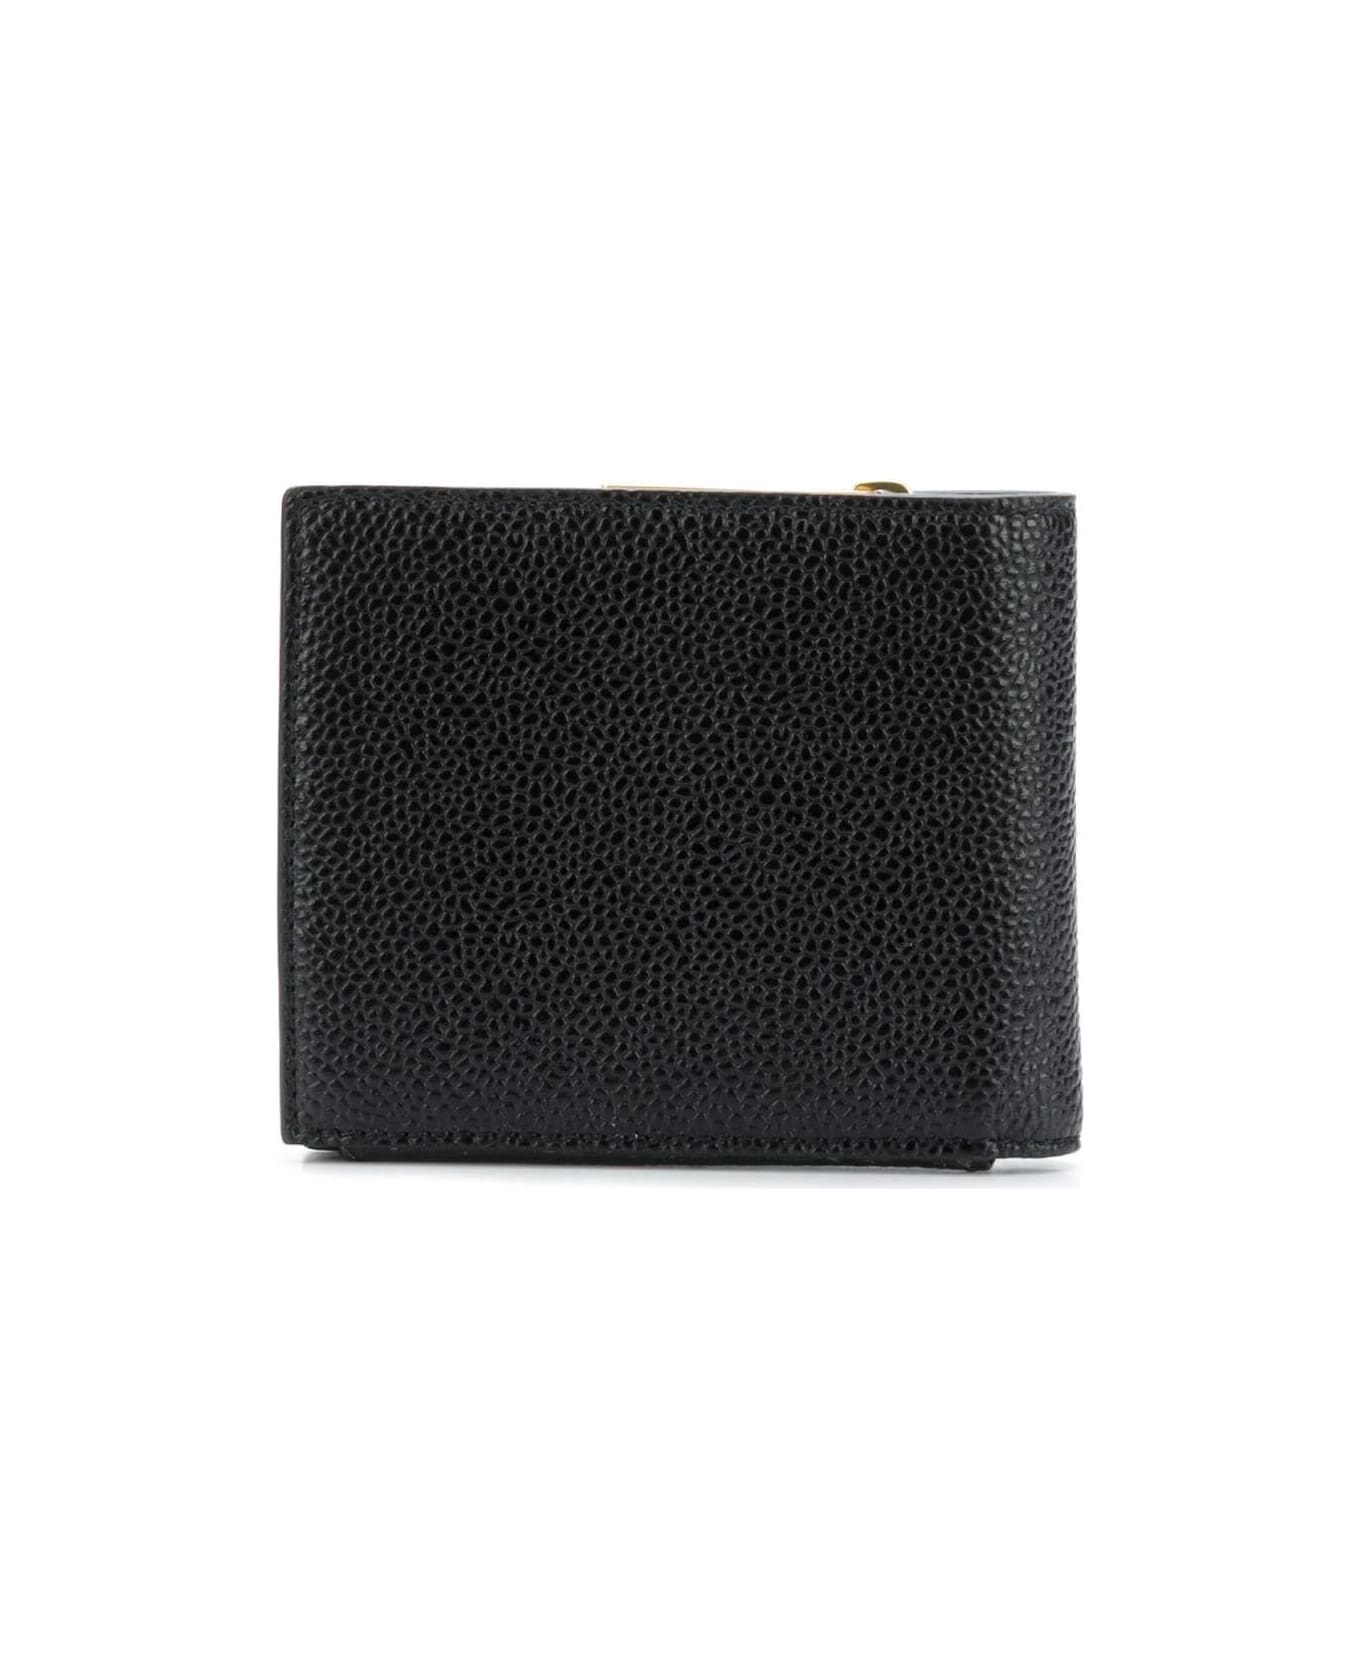 Thom Browne Billfold With Fold Out Coin Purse In Pebble Grain Leather - Black